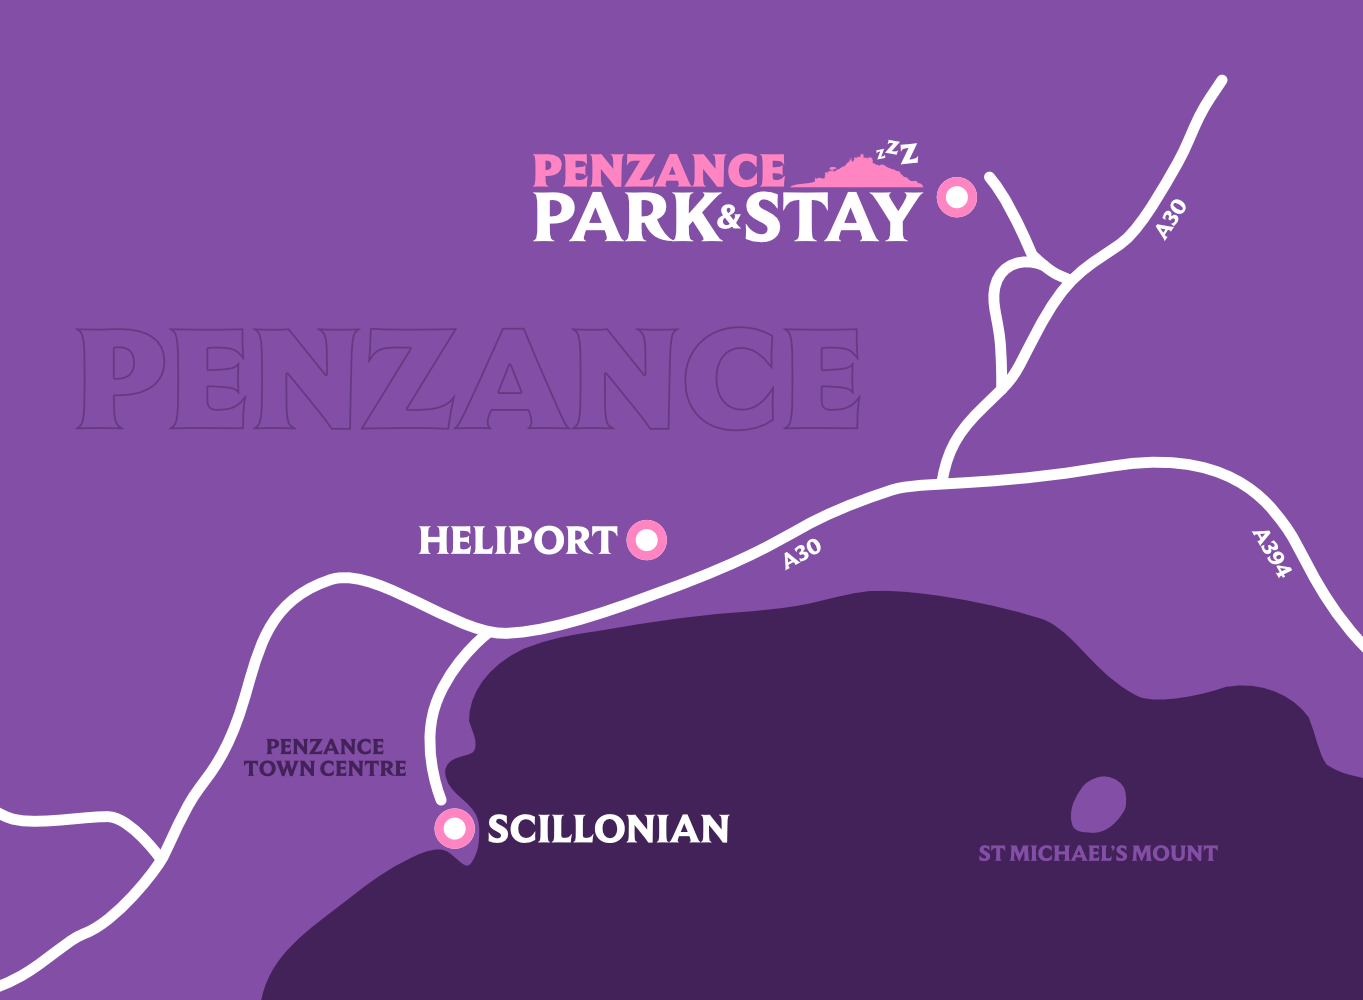 Our location in Penzance